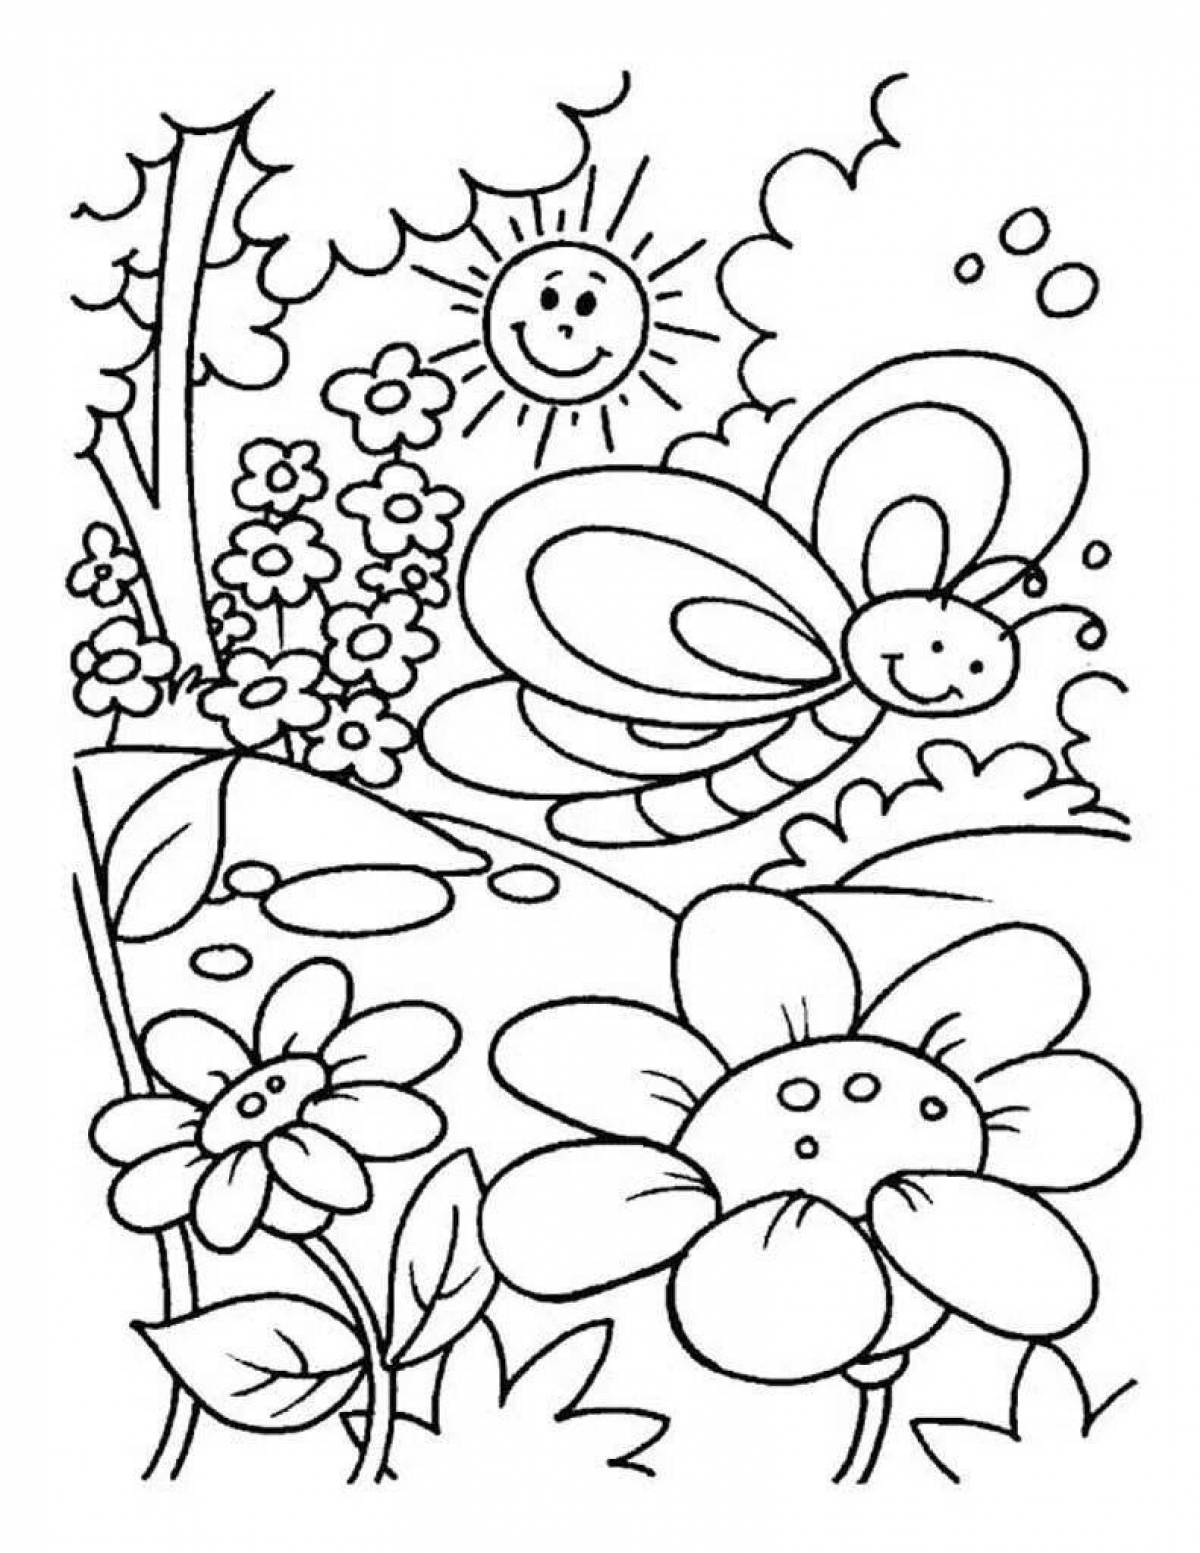 Glitter colors 10 years old coloring book